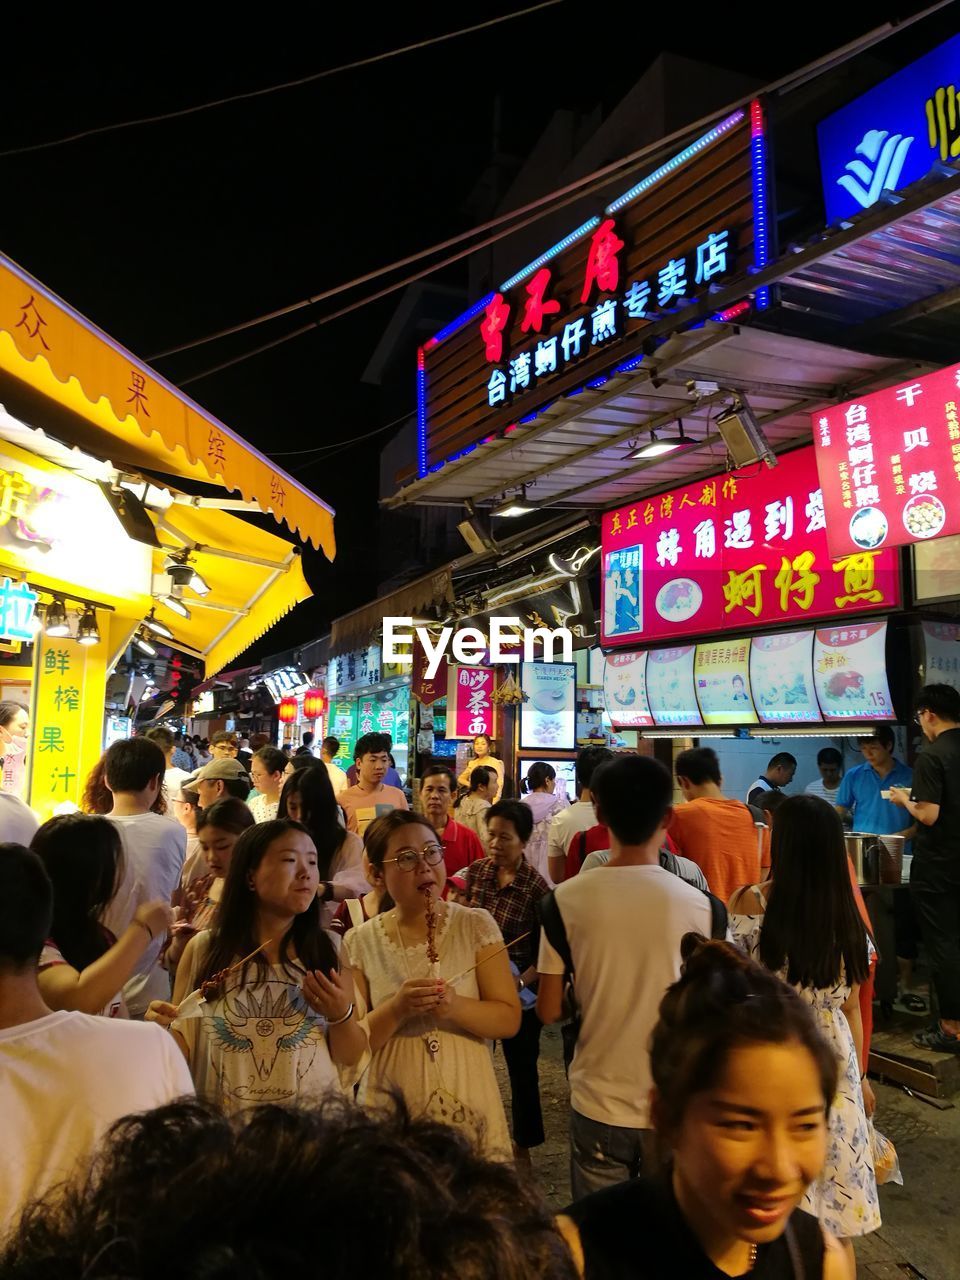 CROWD AT MARKET IN CITY AT NIGHT